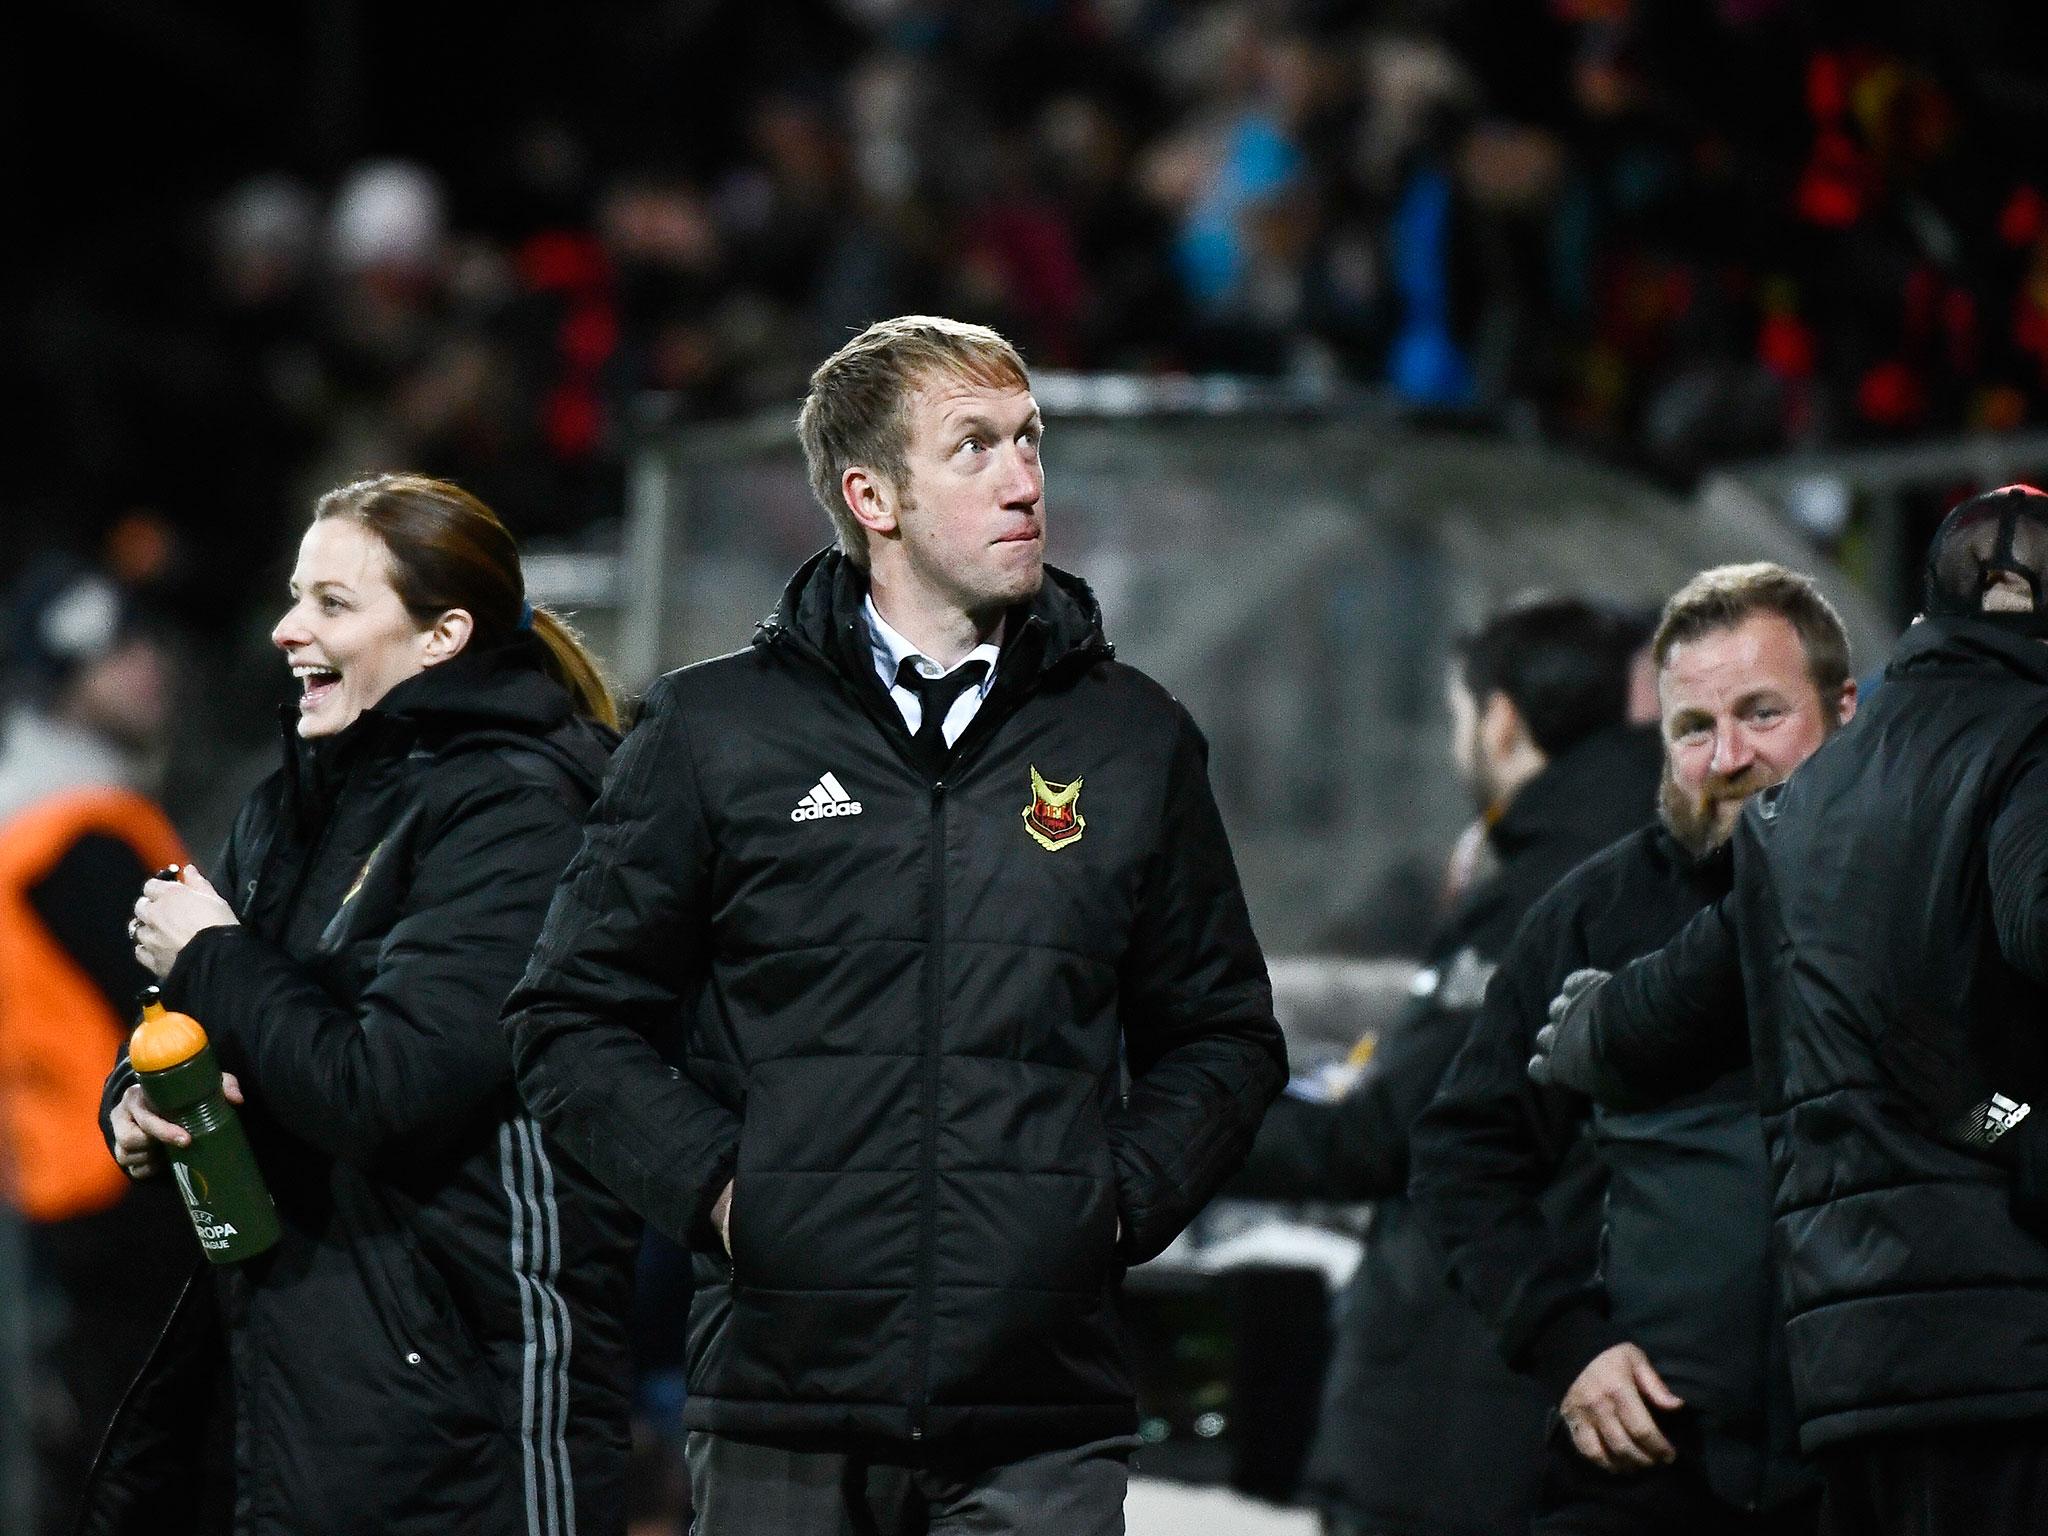 An English coach in Europe: Graham Potter on his Swedish renaissance with Östersunds